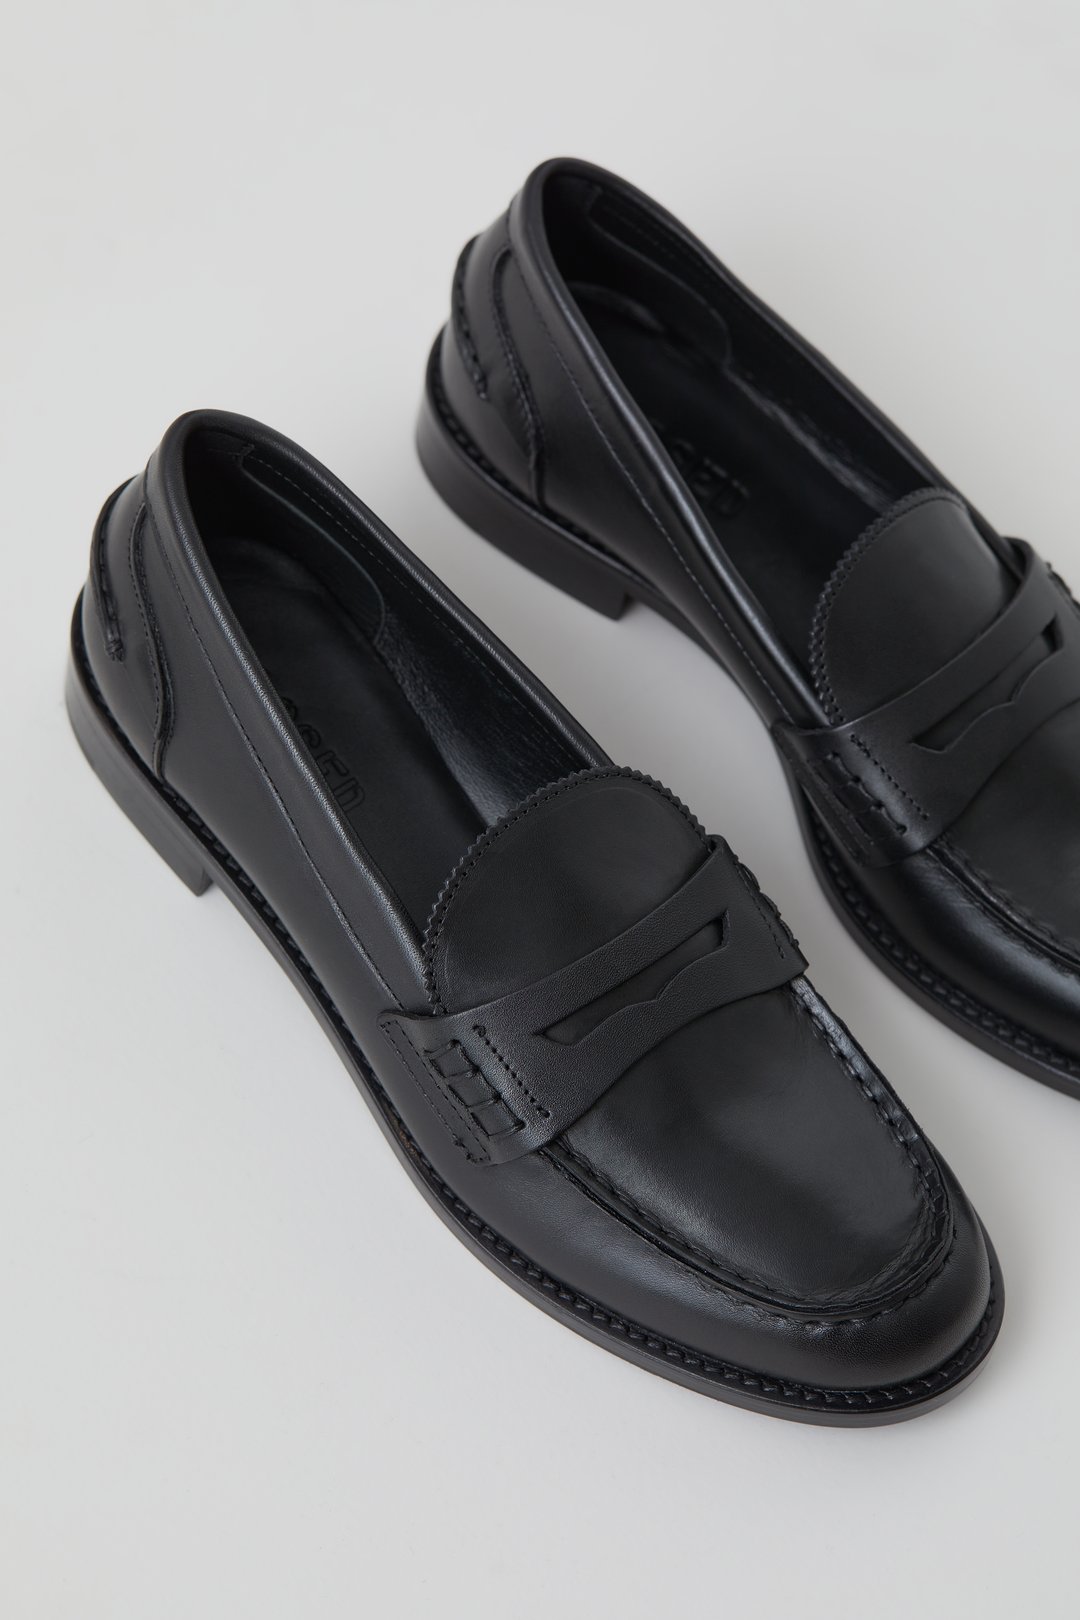 Loafers: A Brief History - The Cheaney Journal